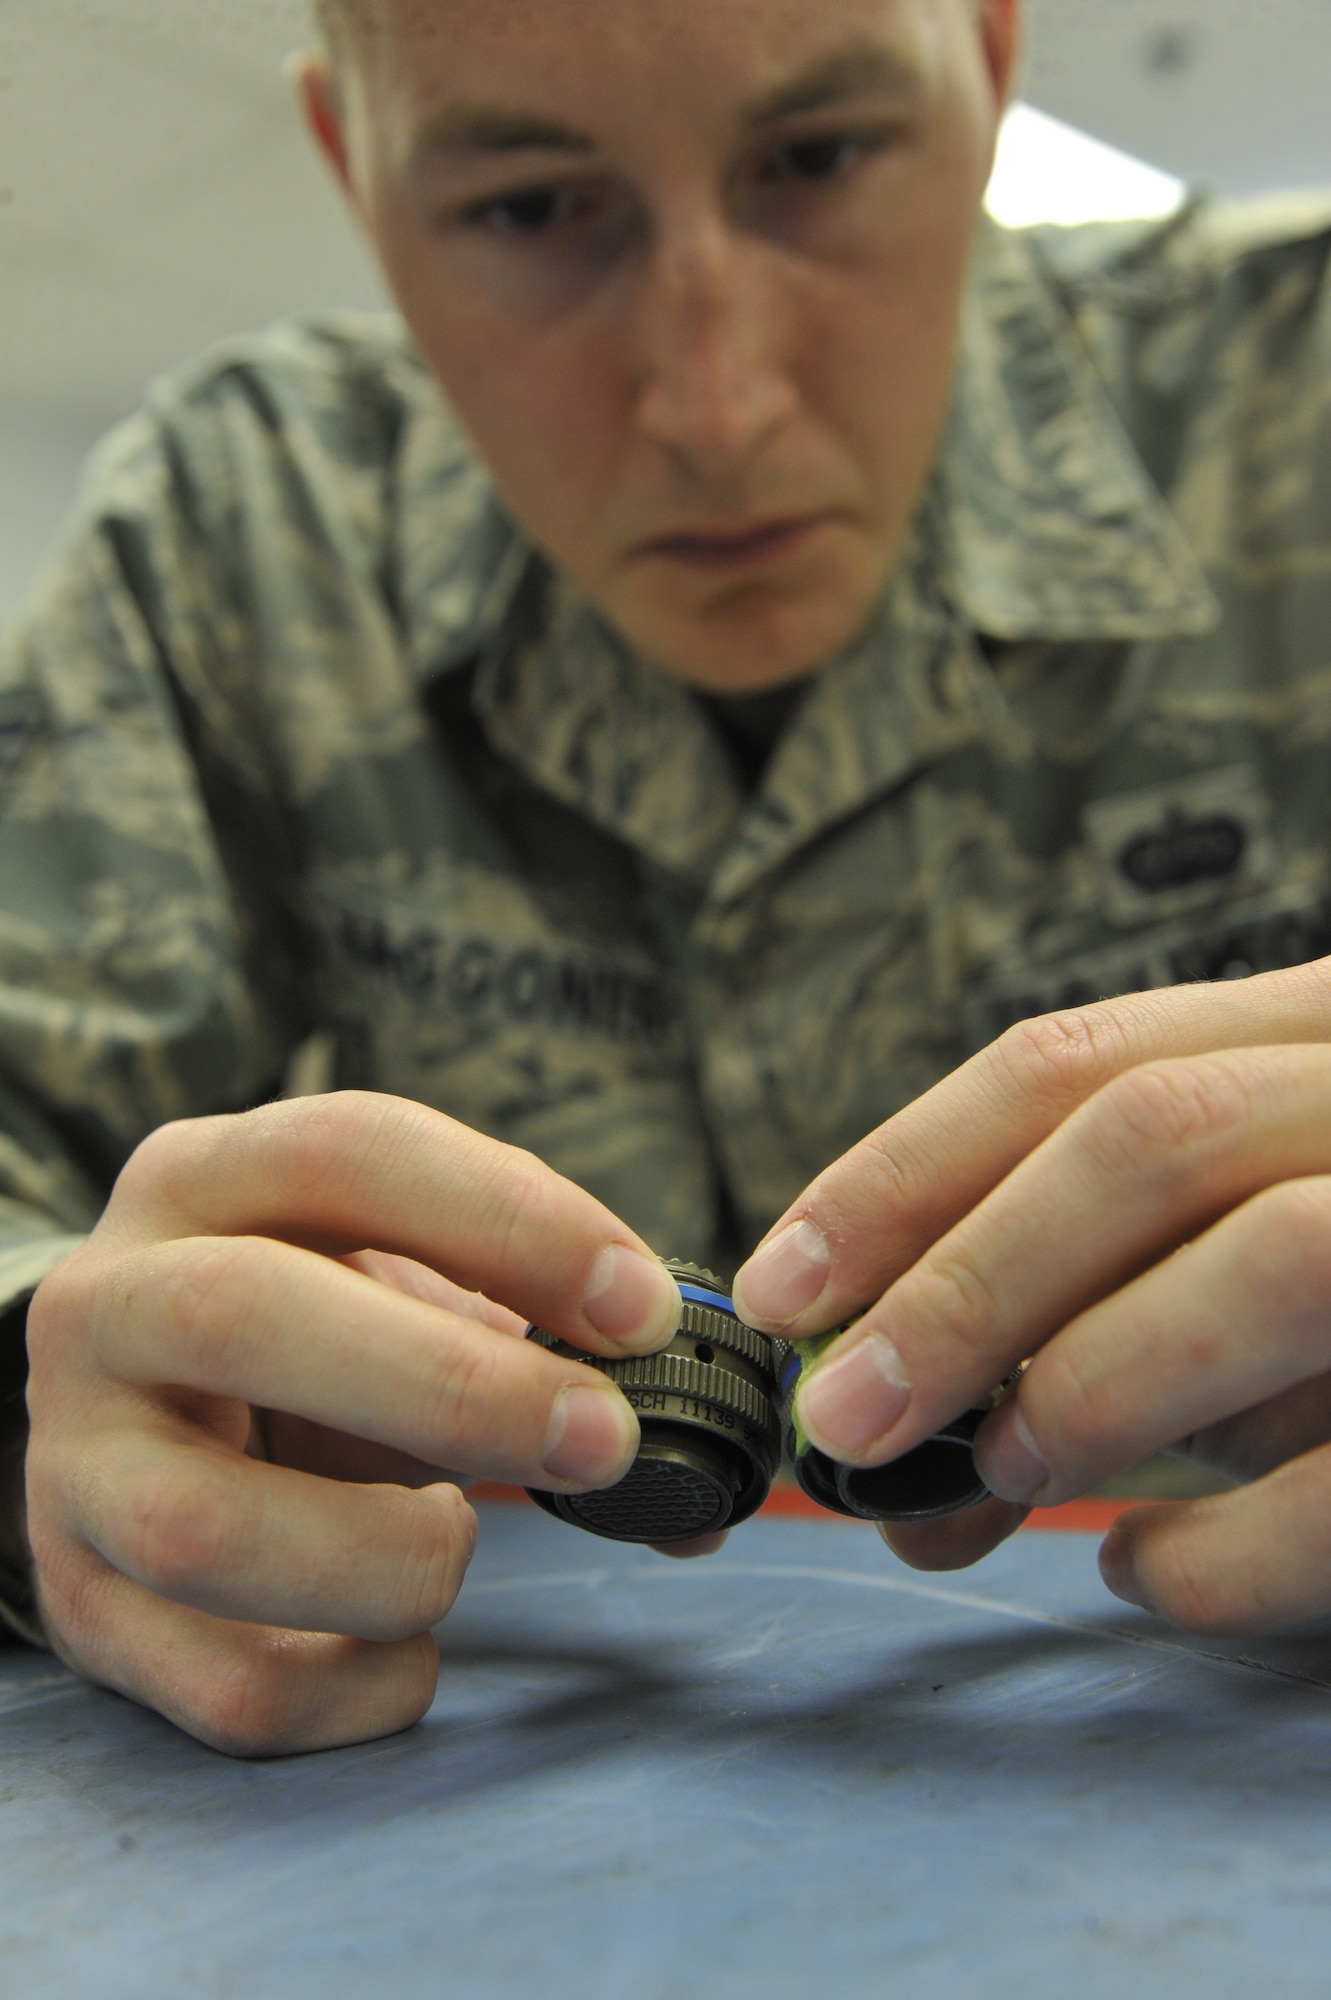 U.S. Air Force Staff Sgt. Jaret Waggoner, 72nd Test and Evaluation Squadron network systems administrator, inspects cannon plugs at Whiteman Air Force Base, Mo., Oct. 29, 2013. Cannon plugs are combined to transmit data and ensure there is a secure connection within the aircraft. (U.S. Air Force photo by Airman 1st Class Keenan Berry/Released)